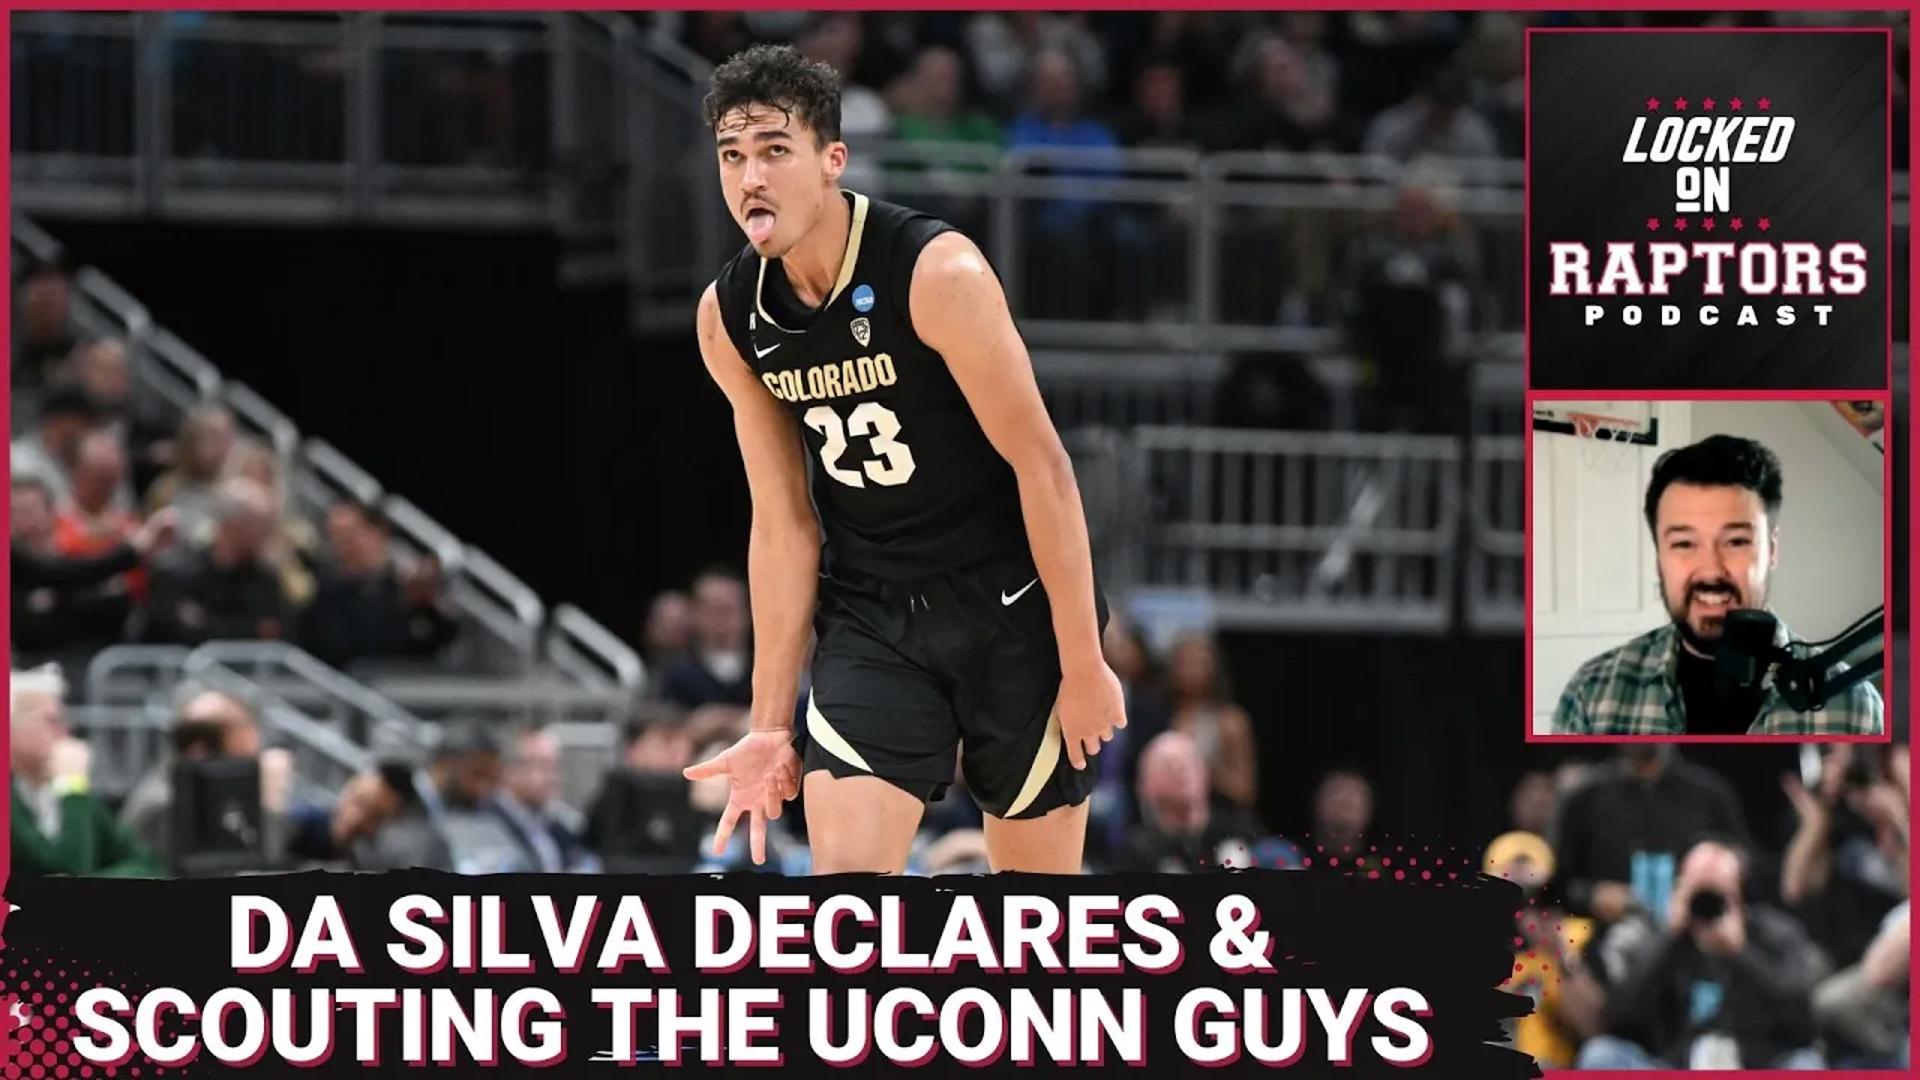 In Episode 1626, Sean Woodley goes solo to discuss Colorado wing and potential Toronto Raptors target at 19th-overall